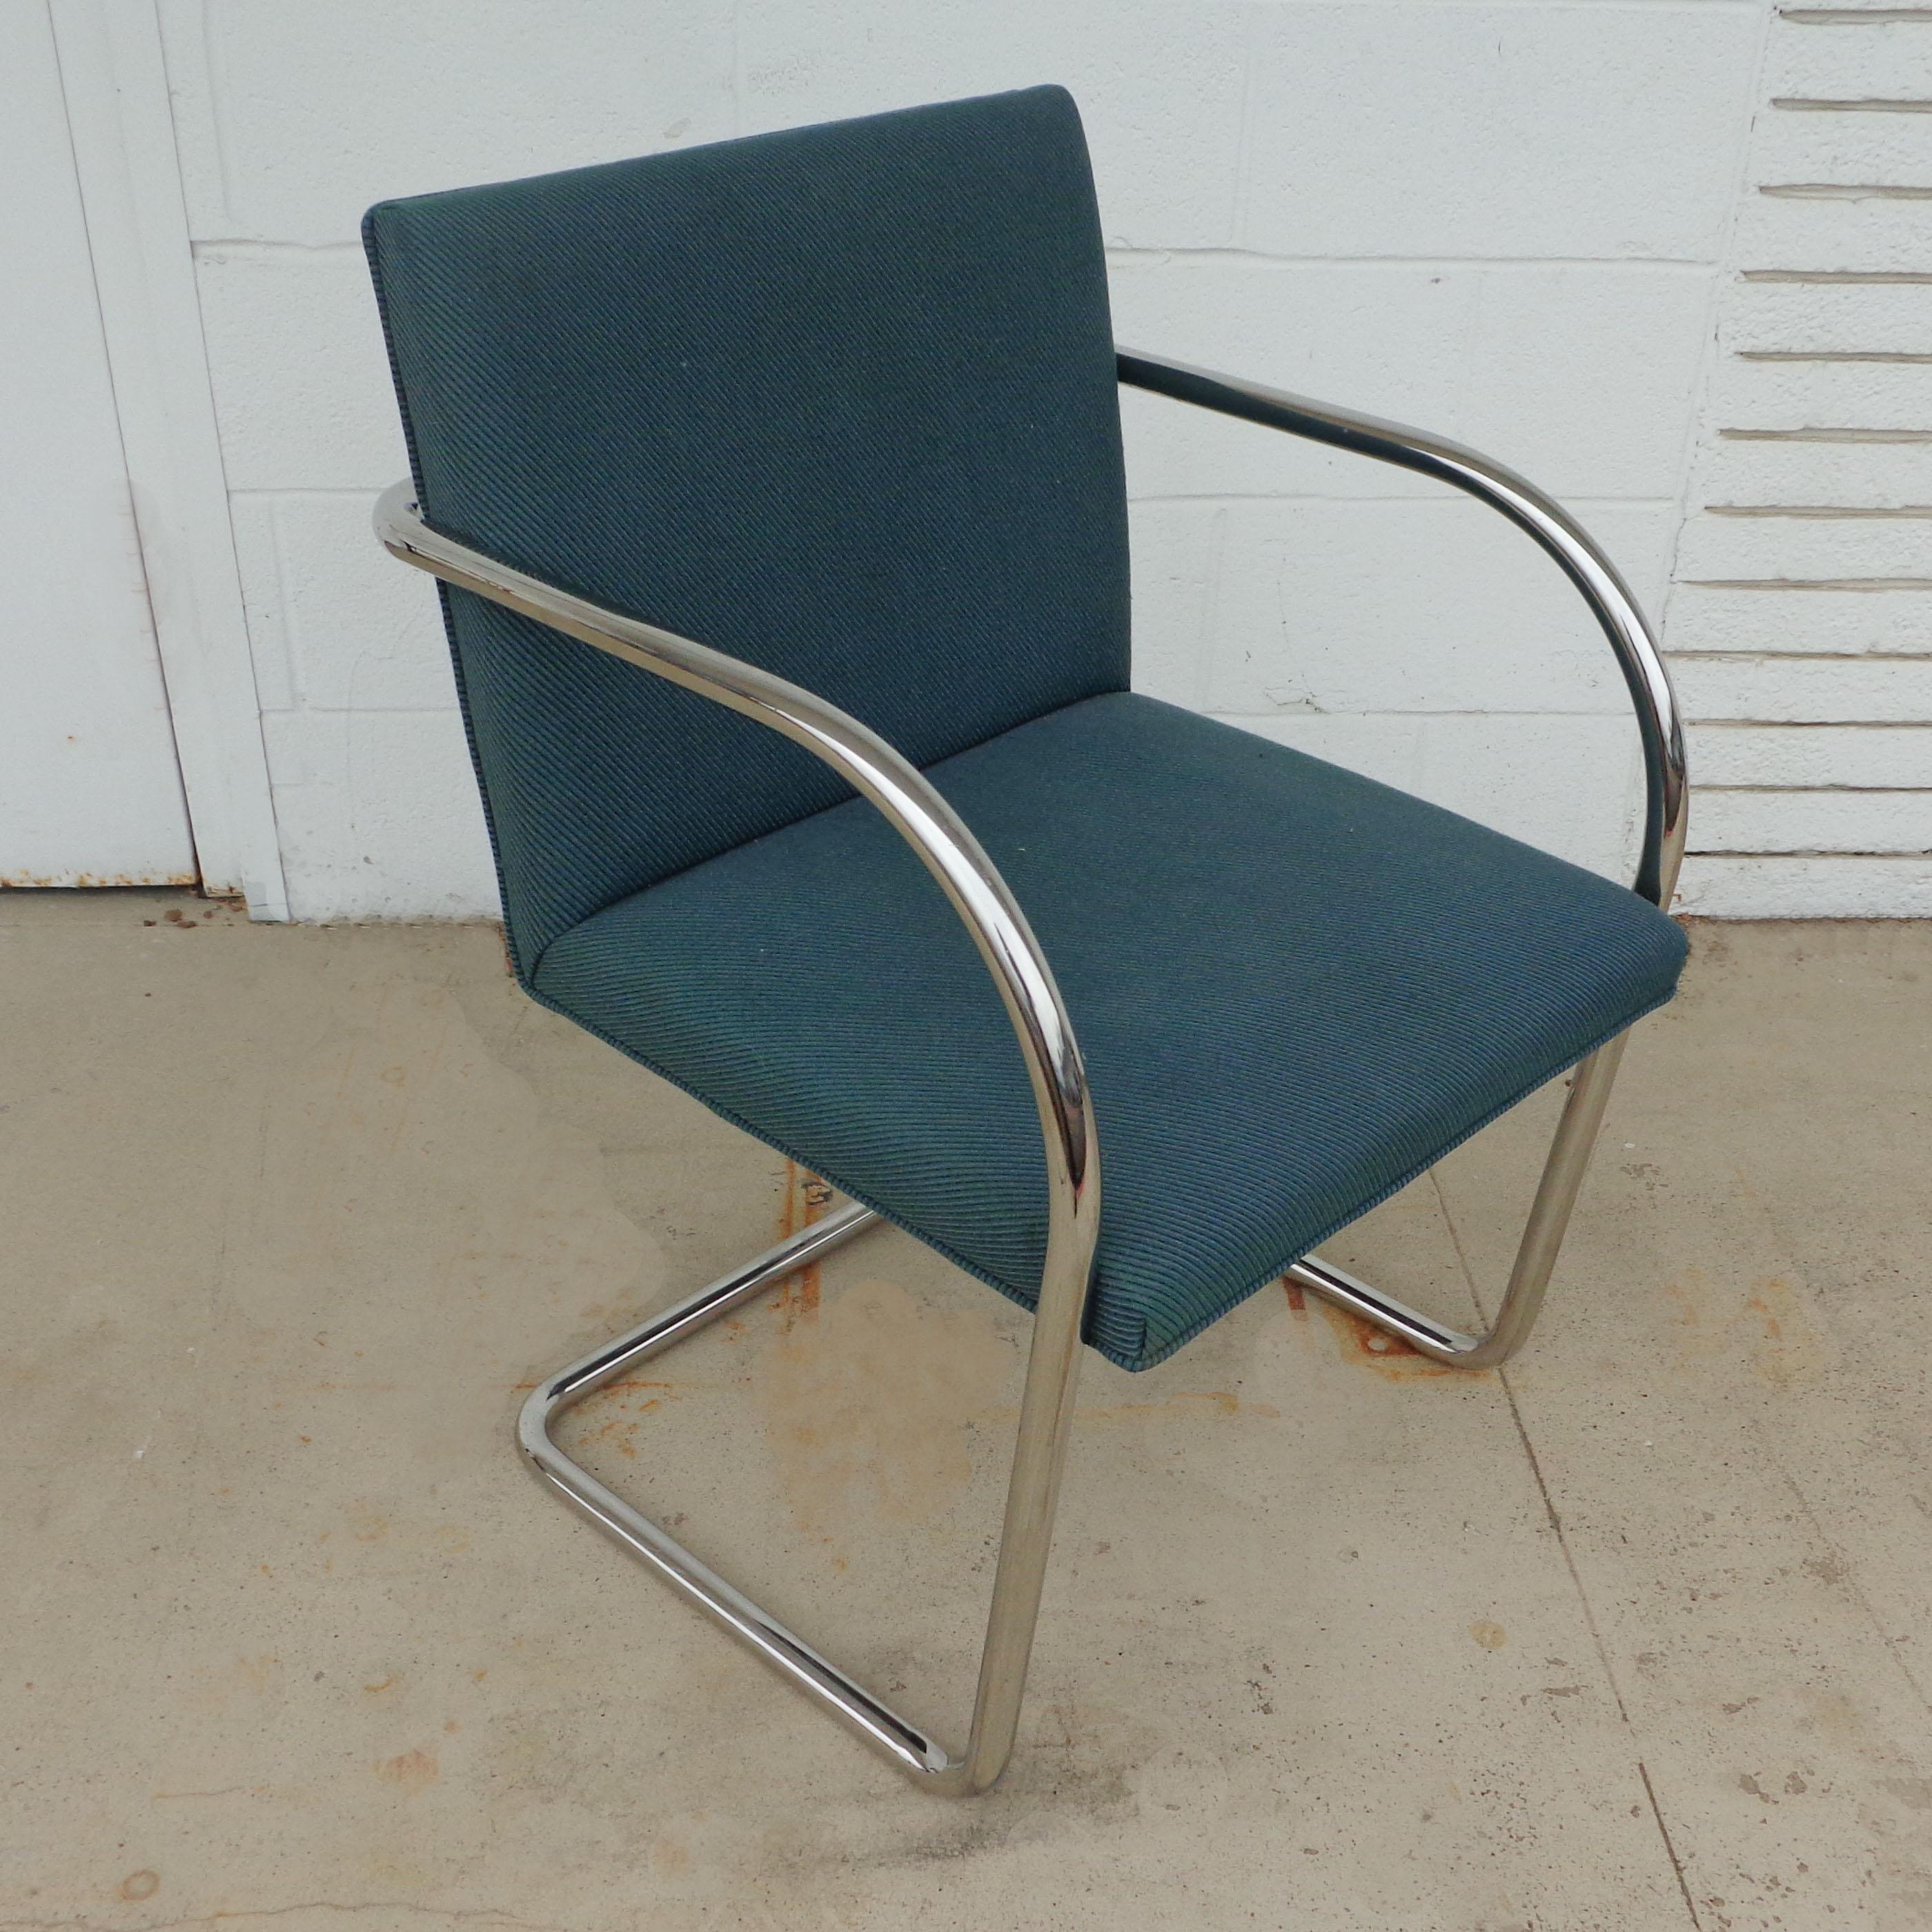 Set of 6 Brueton Industries Brno Tubular Chairs

Designed by Ludwig Mies van der Rohe. Stainless steel tubular frames. 
MFG label underneath.

 Seat height: 17.5